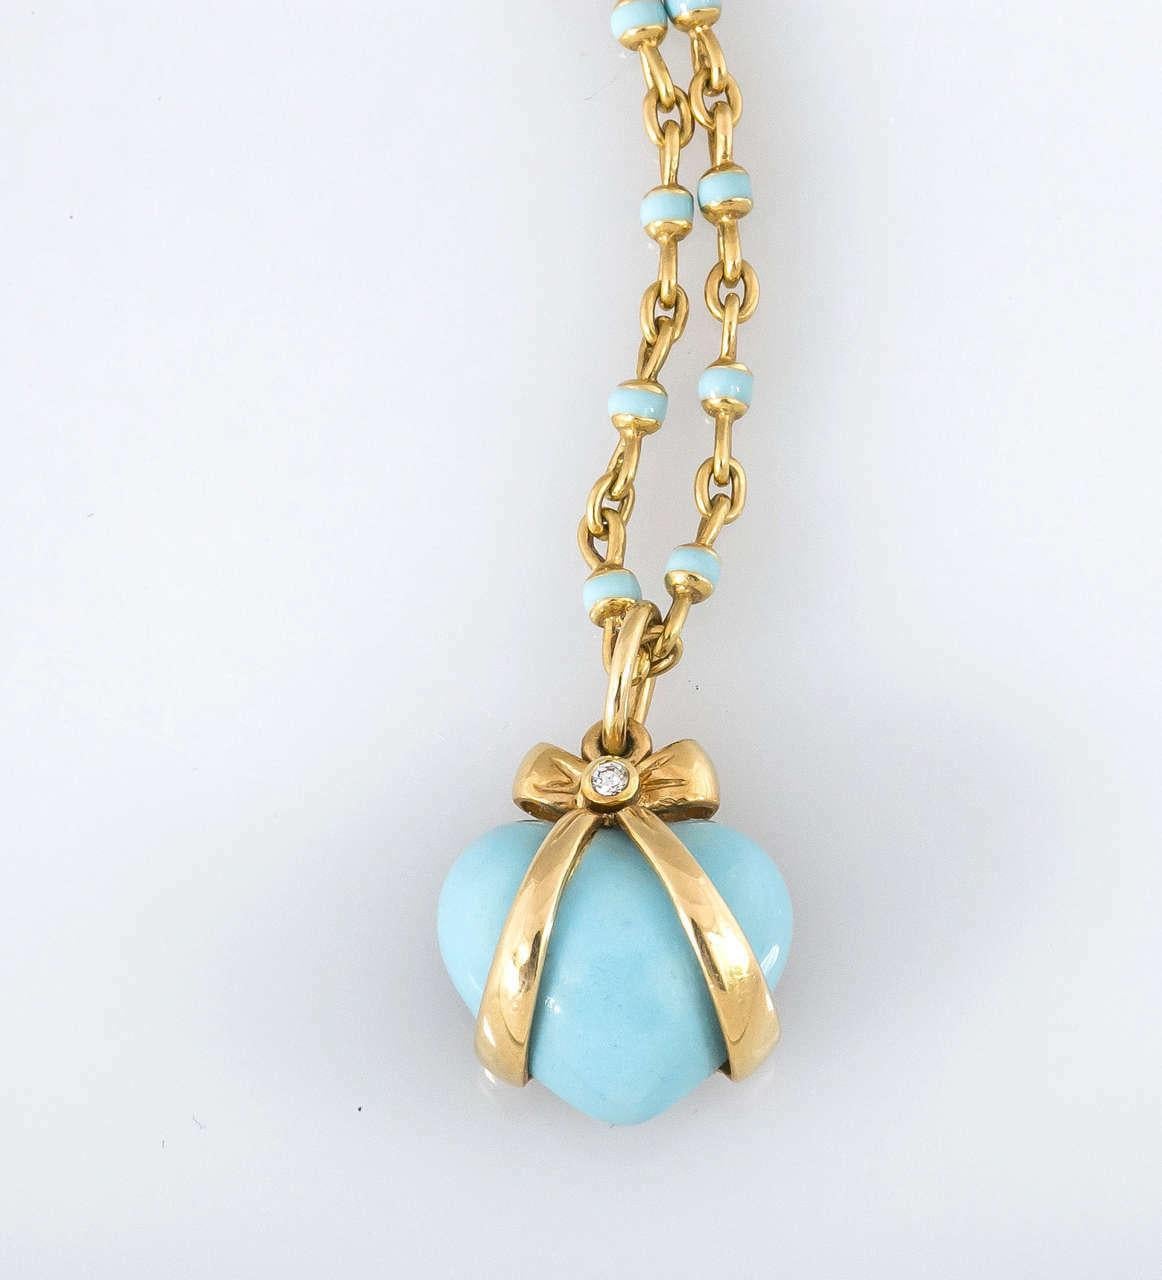 Bielka 18k yellow Gold & Turquoise Enamel Heart Pendant with diamonds

Turquoise enamel heart pendant, wrapped in an 18k yellow gold bow and accented by round-cut diamonds. Two diamonds weighing 0.02 total carats. Handcrafted in New York City.